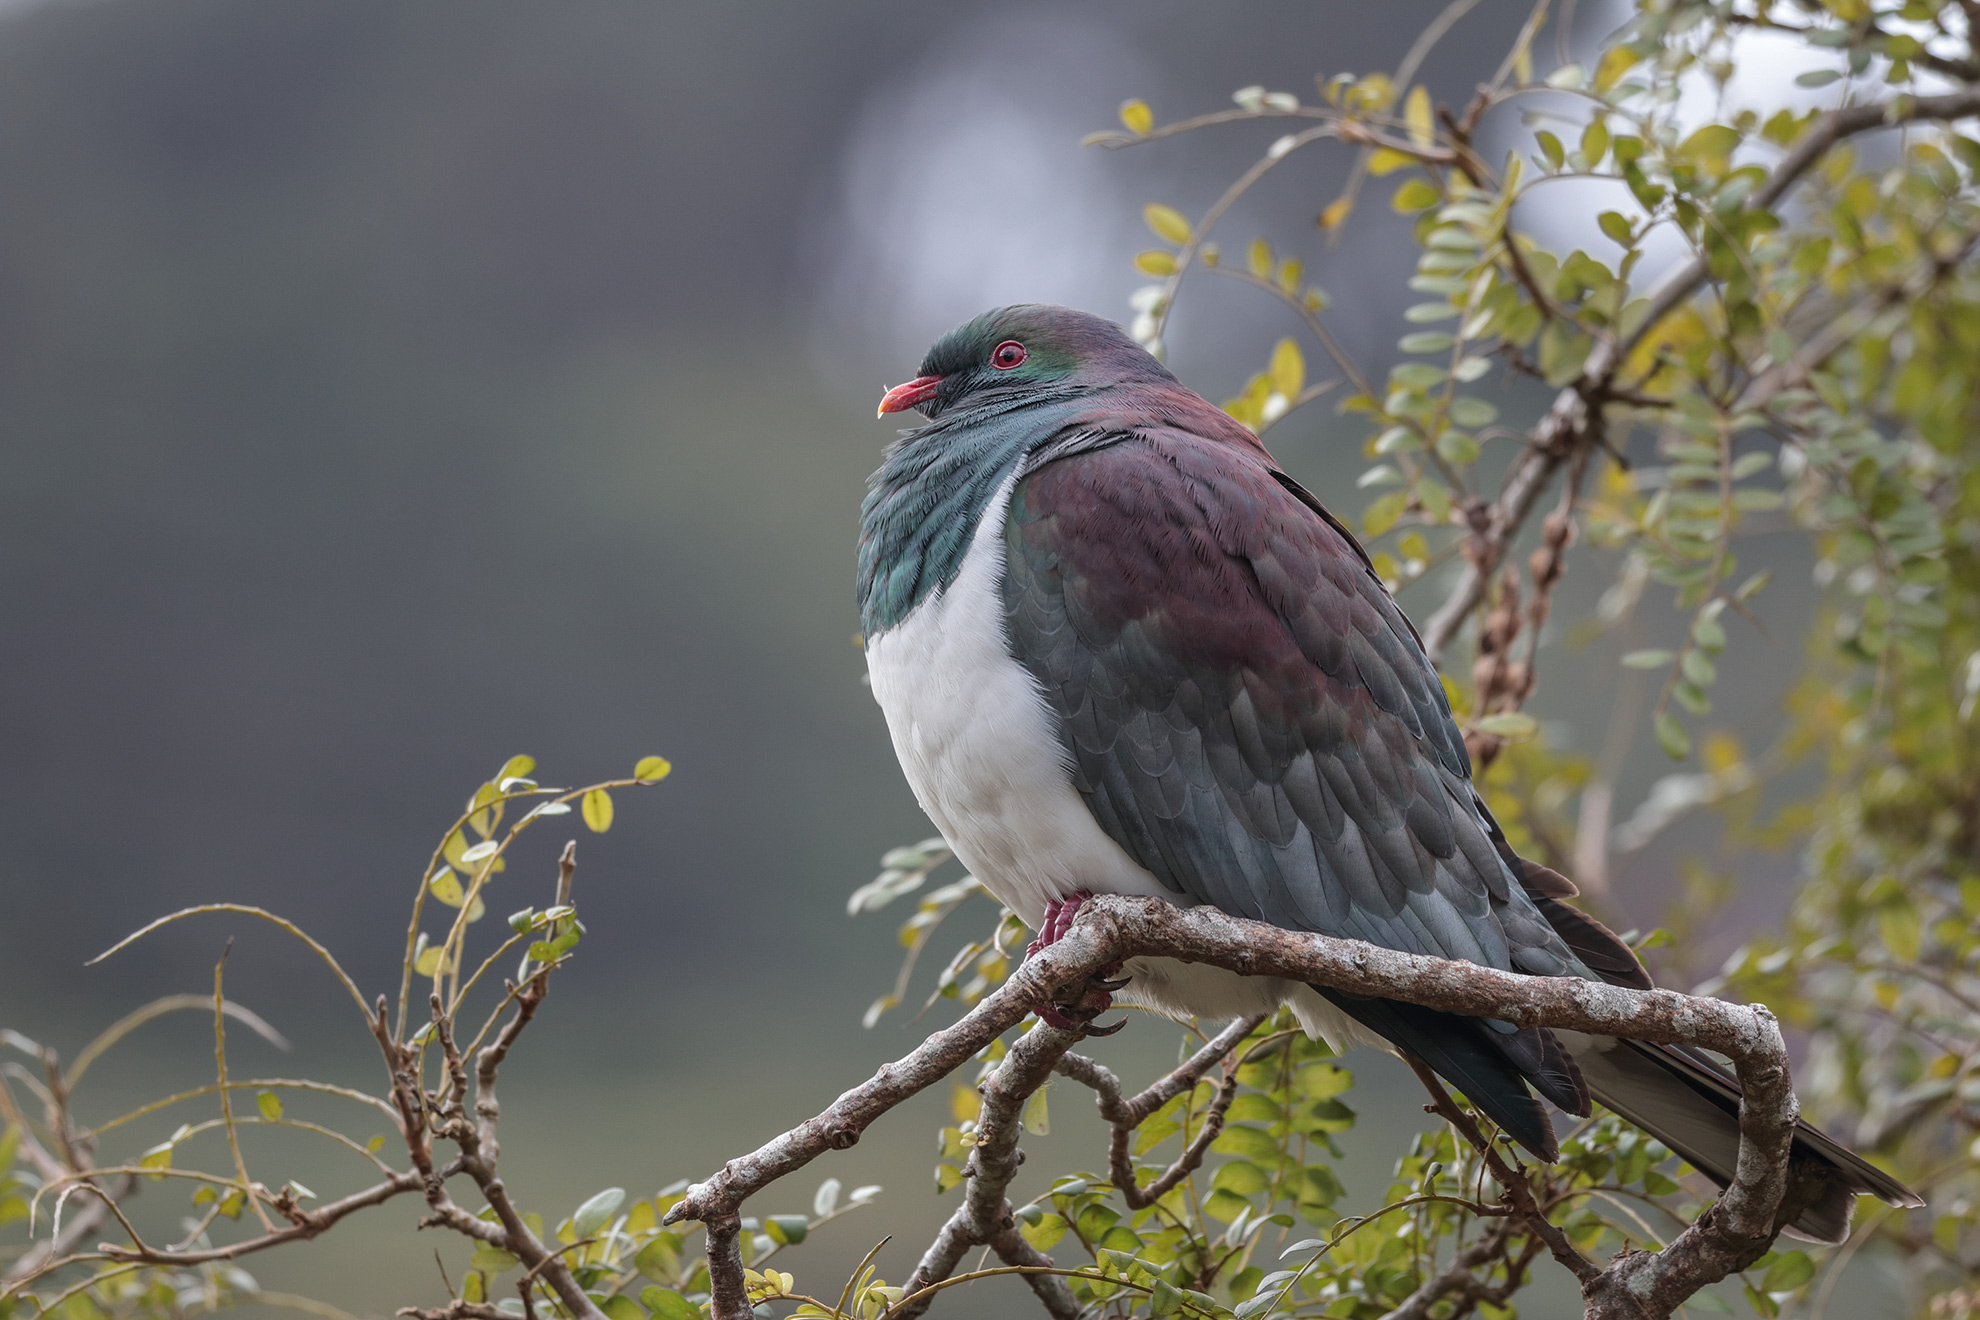 Year six of data collecting is about to start with the return of the Great Kererū Count 2019